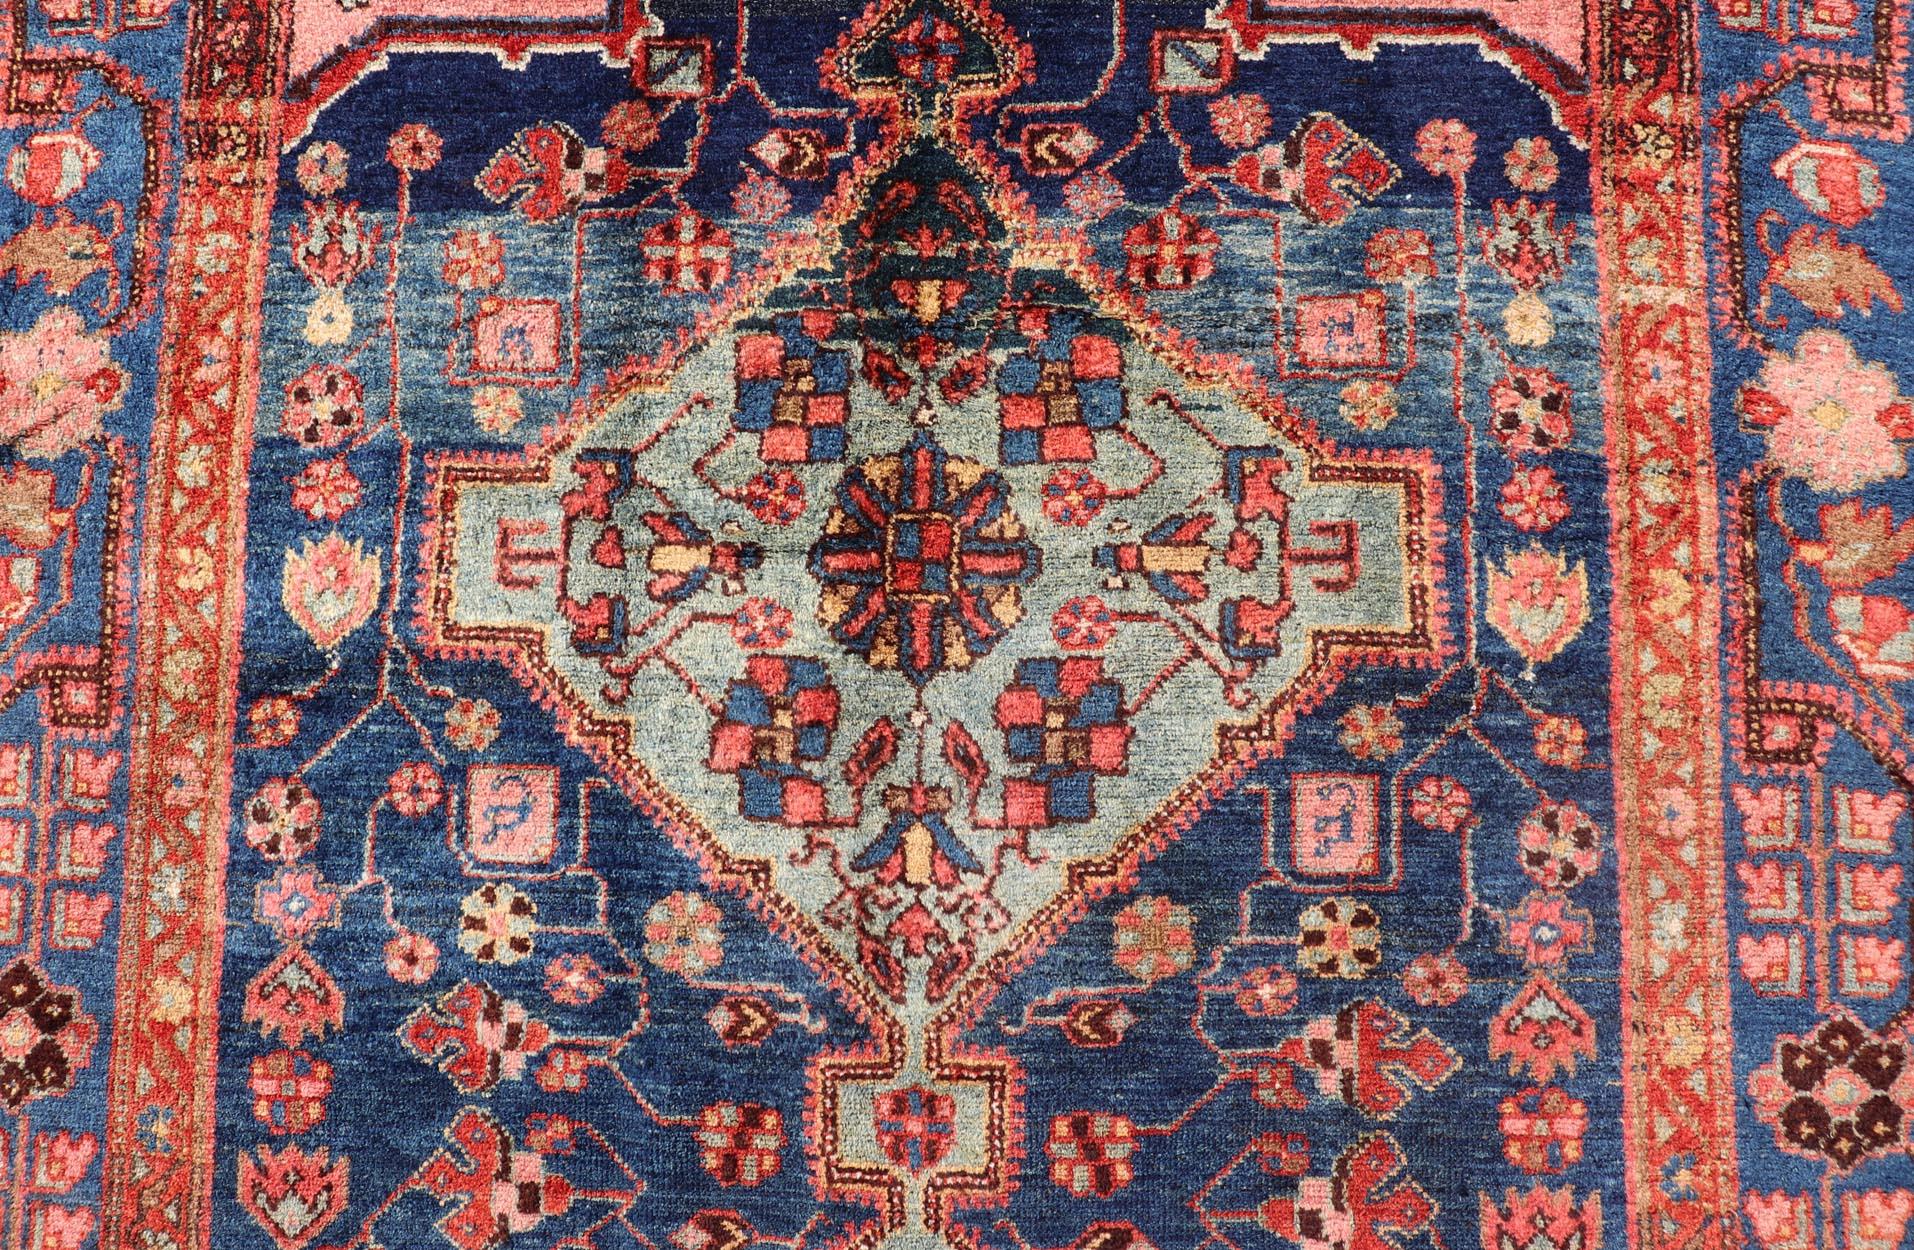 Antique Persian Karajeh Rug with Geometric Medallions in Green, Blue, and Red 5